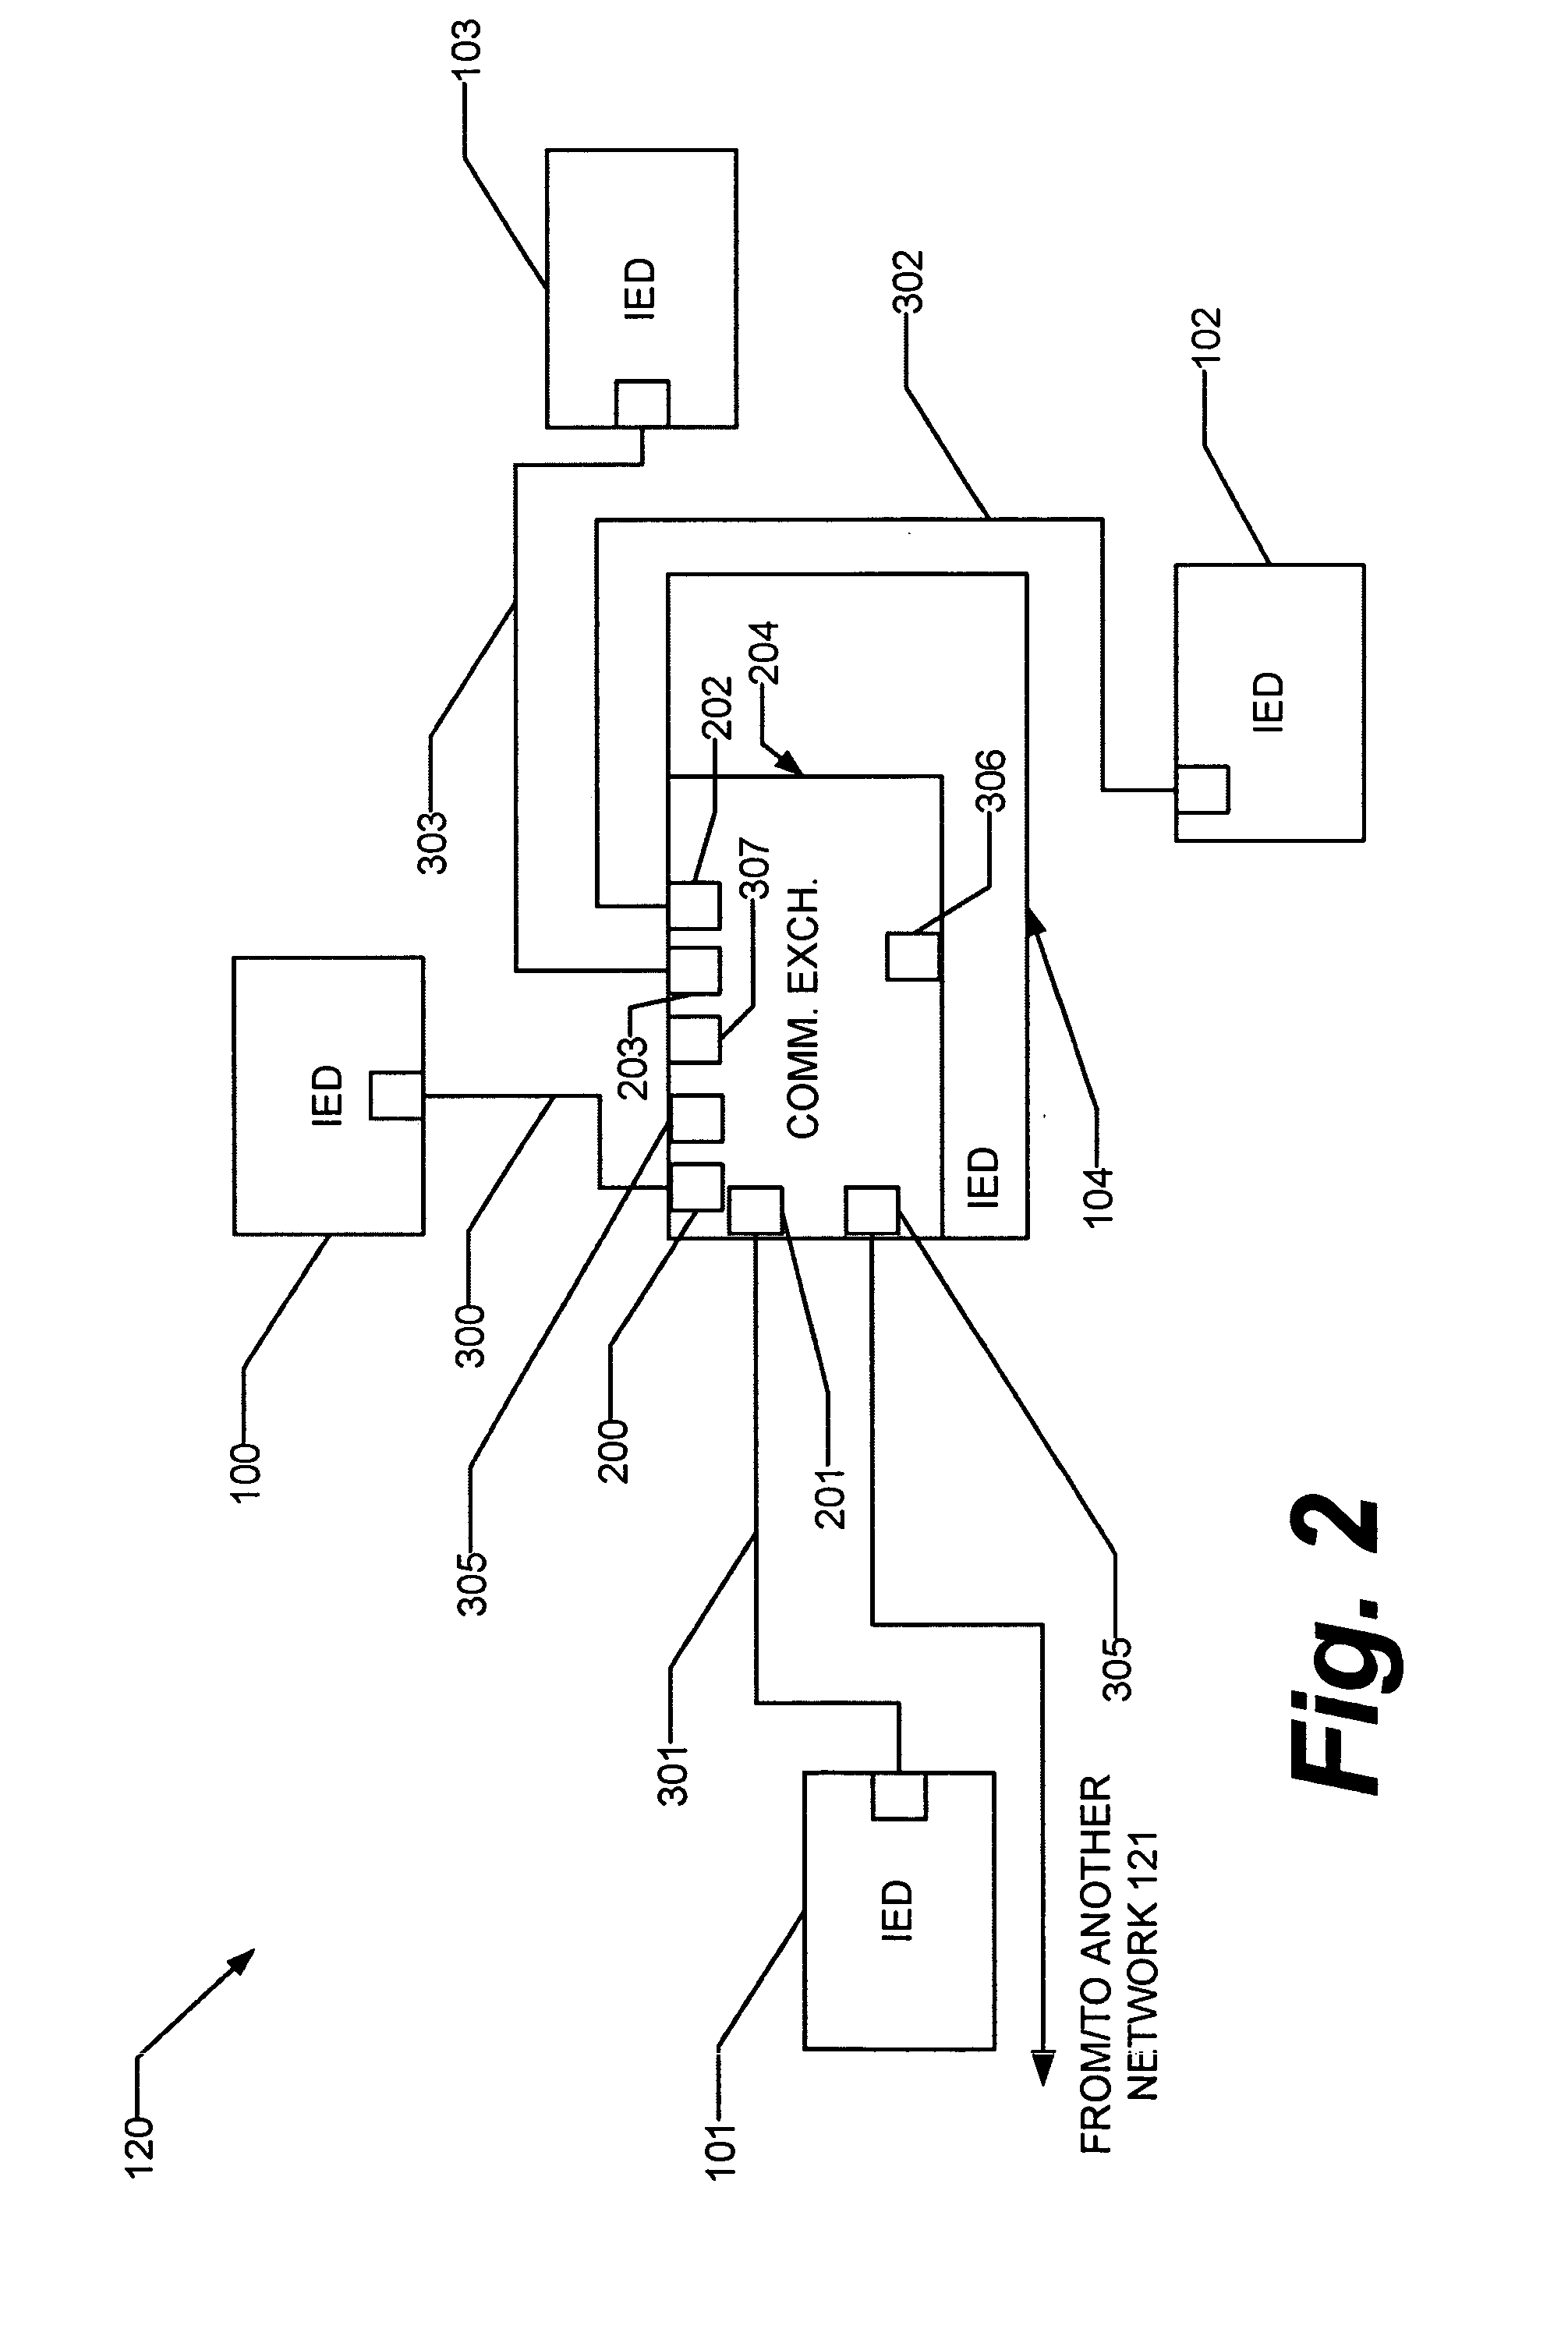 Intelligent electronic device with embedded multi-port data packet controller